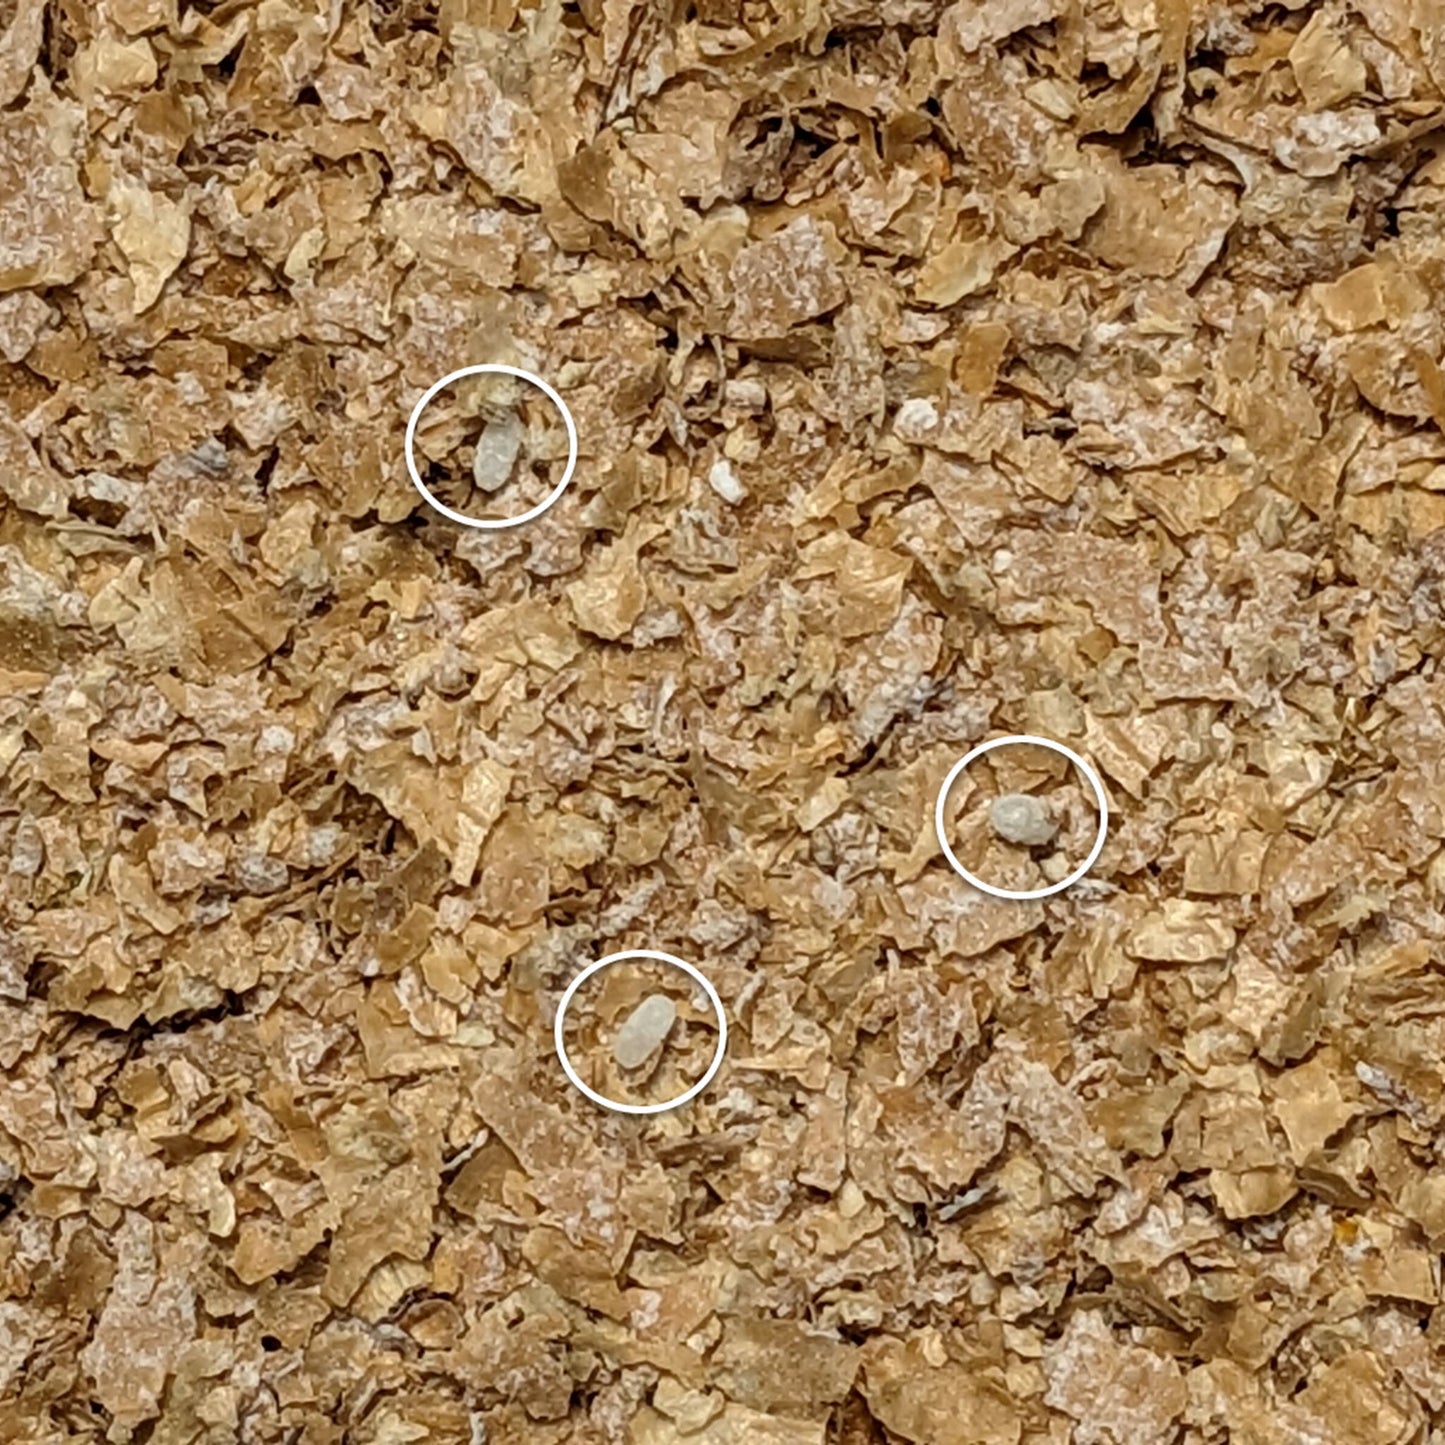 Close-up of mealworm eggs.